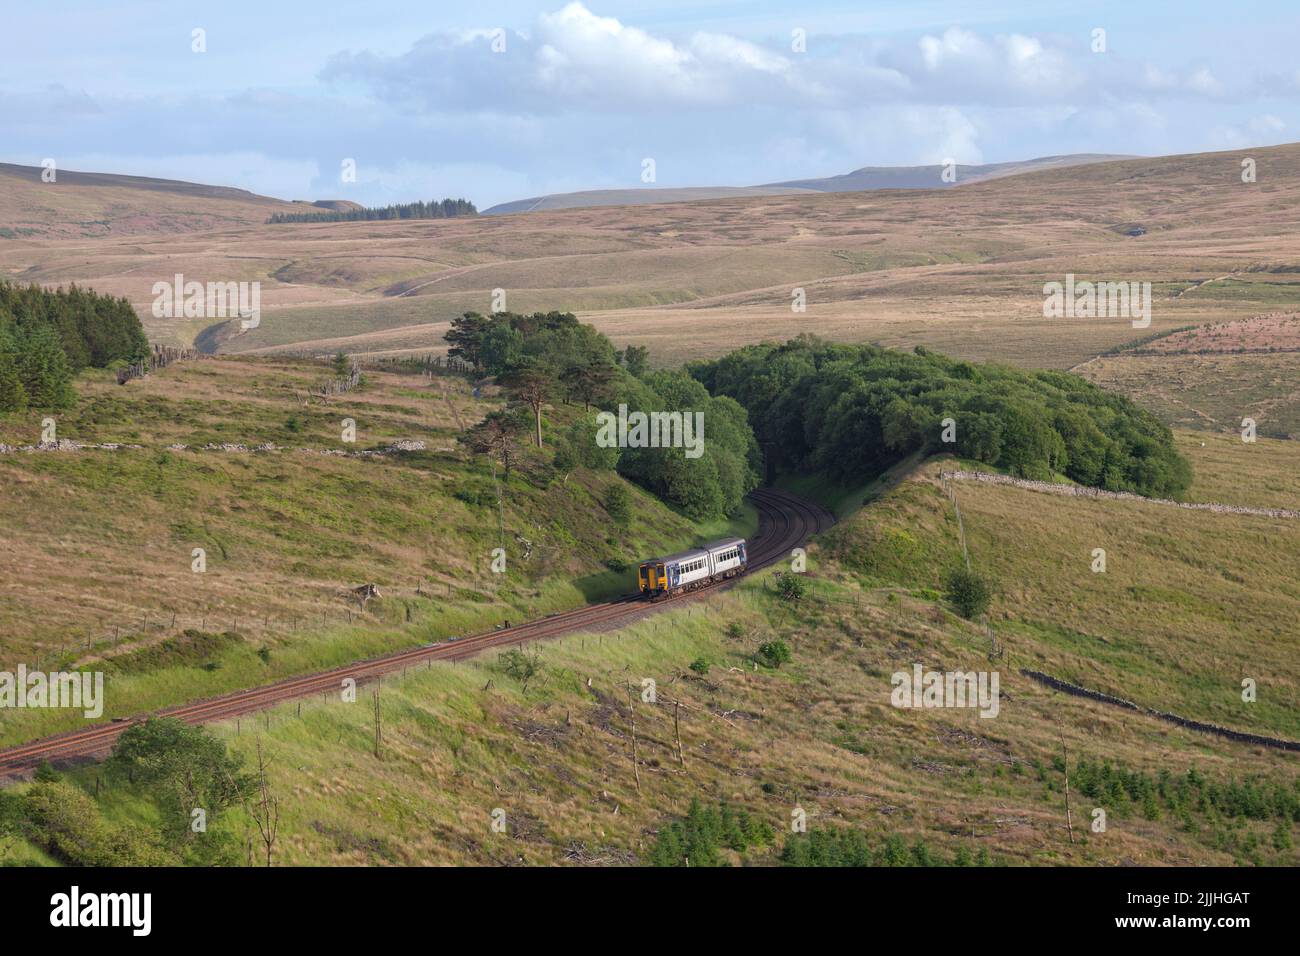 Northern Rail class 156 sprinter train in the countryside on the scenic Settle to Carlisle railway line near dent approaching Rise Hill tunnel Stock Photo